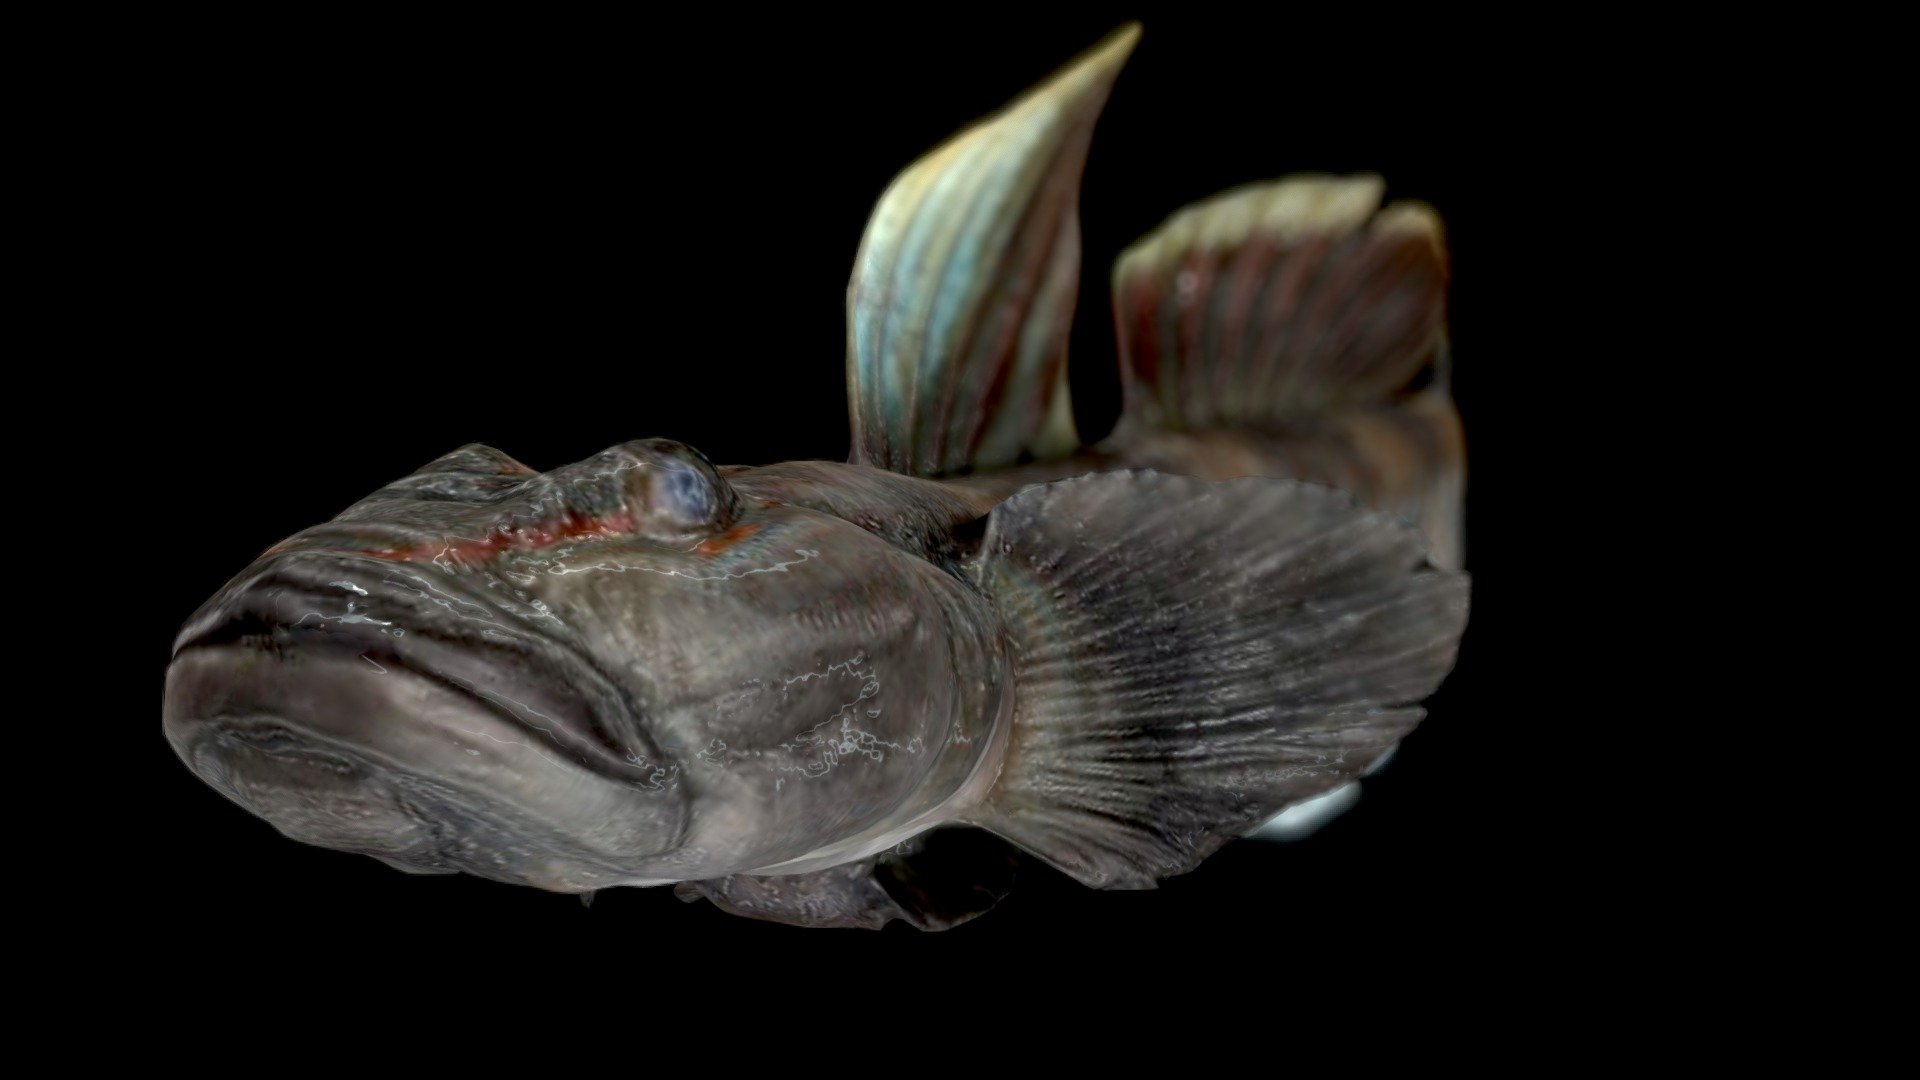 No.1 of 4 models exloring baking looping morph animations in Blender :)

See this collection for all four animations.

Based on トウヨシノボリ ♂ Freshwater Goby, Rhinogobius sp. OR by ffish.asia / floraZia.com, licensed under Creative Commons Attribution 3d model